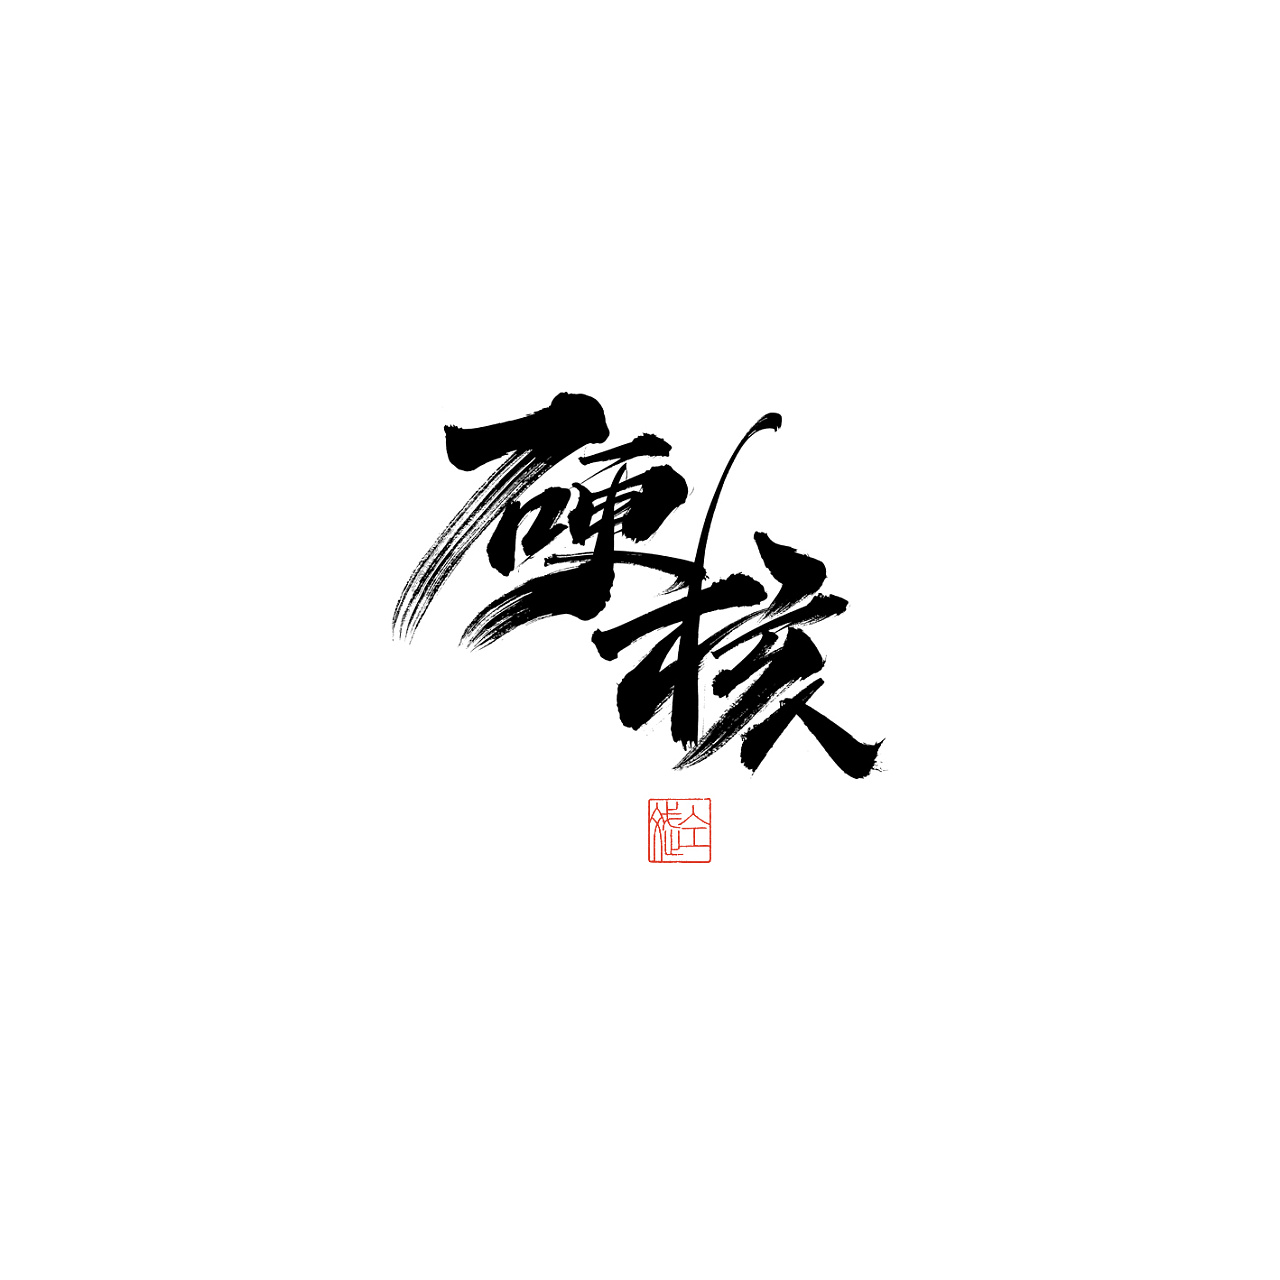 Chinese Creative Font Design-Write in fragments of time and live a good life.